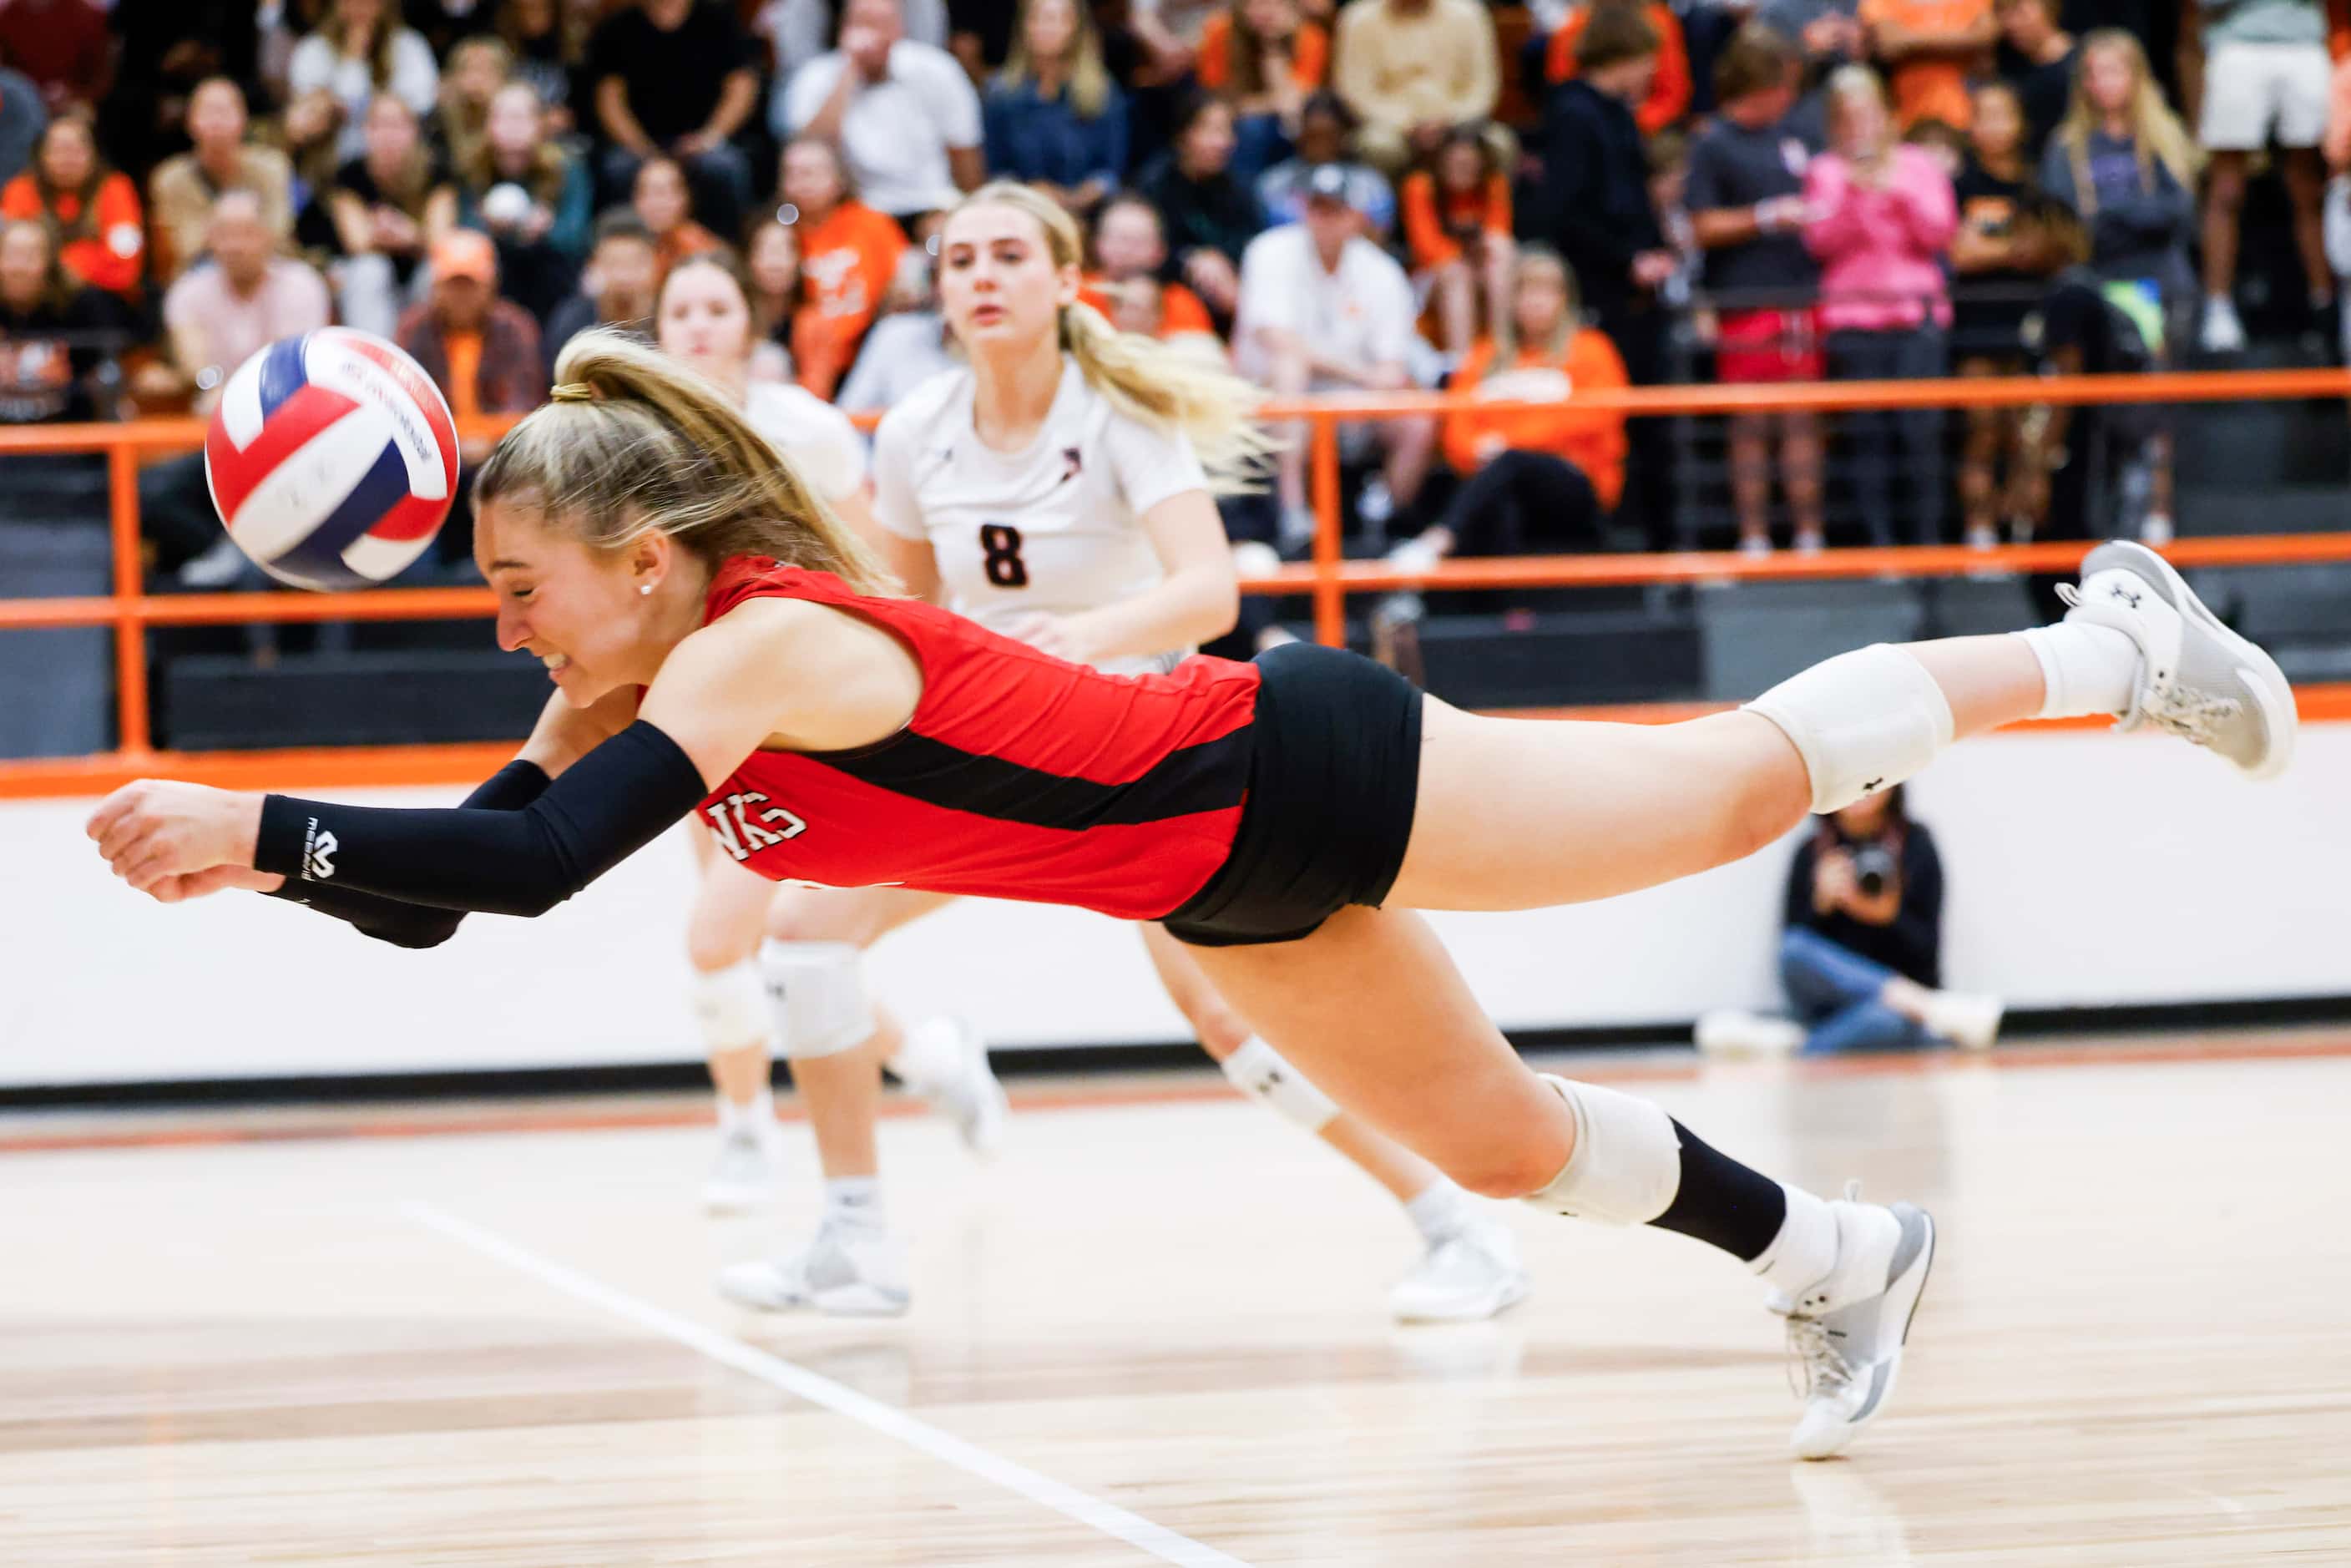 Rockwall heath’s Reese Ruecker dives for a hit during a volleyball game against Rockwall...